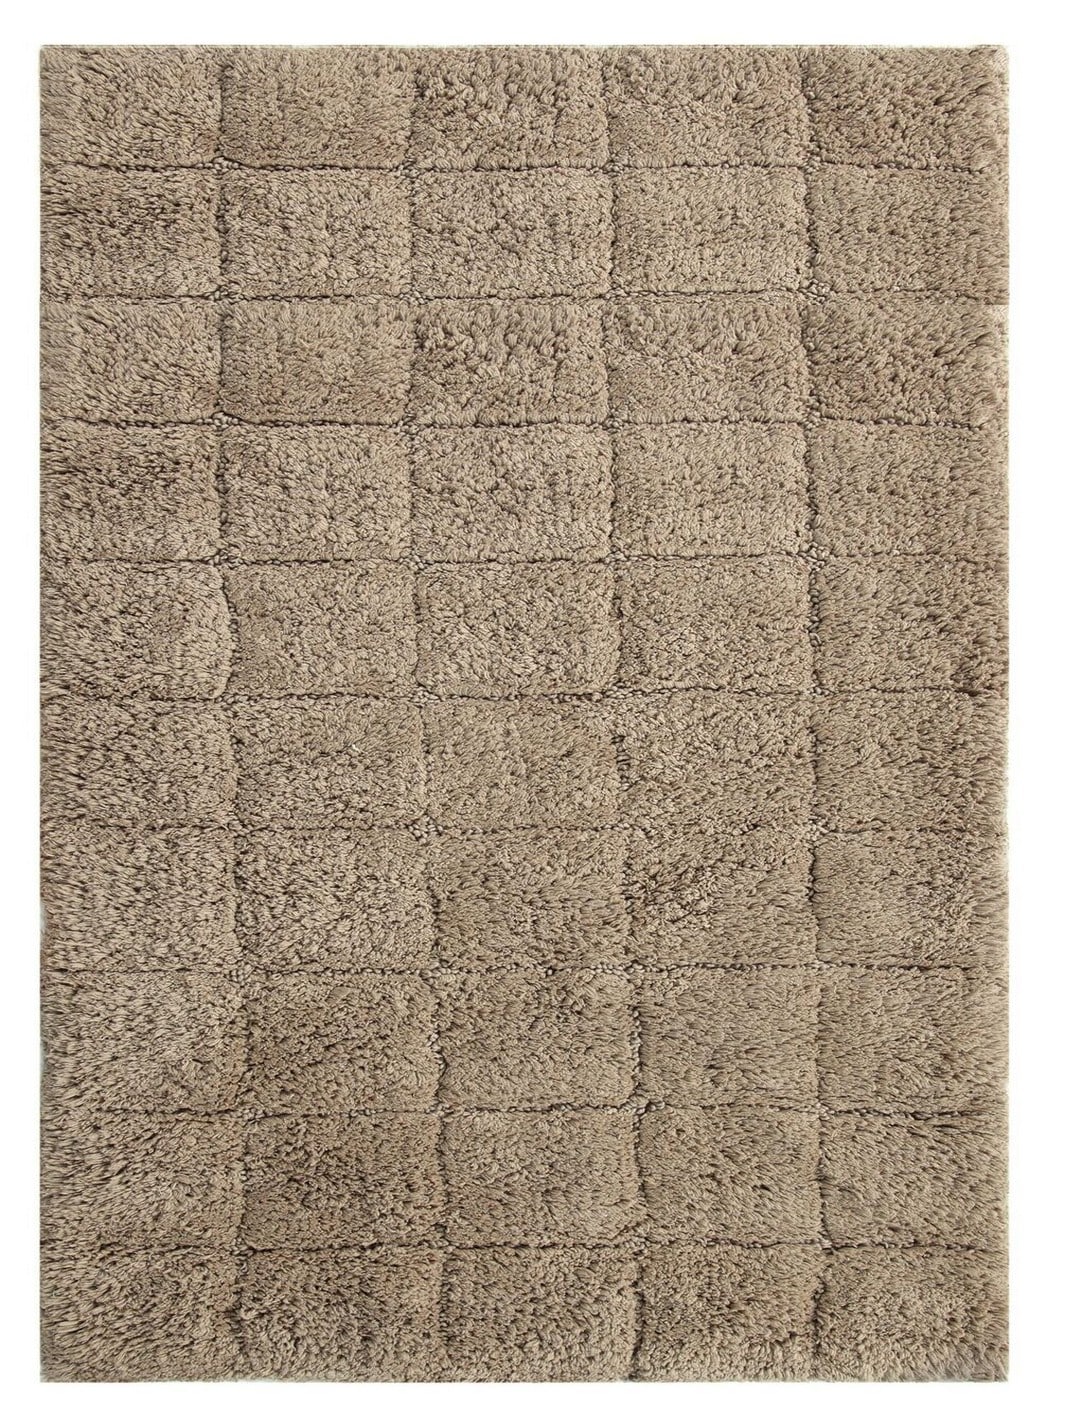 Summer Tile 21x34 rug stone 21-in x 34-in Stone Cotton Bath Rug in the Bathroom  Rugs & Mats department at